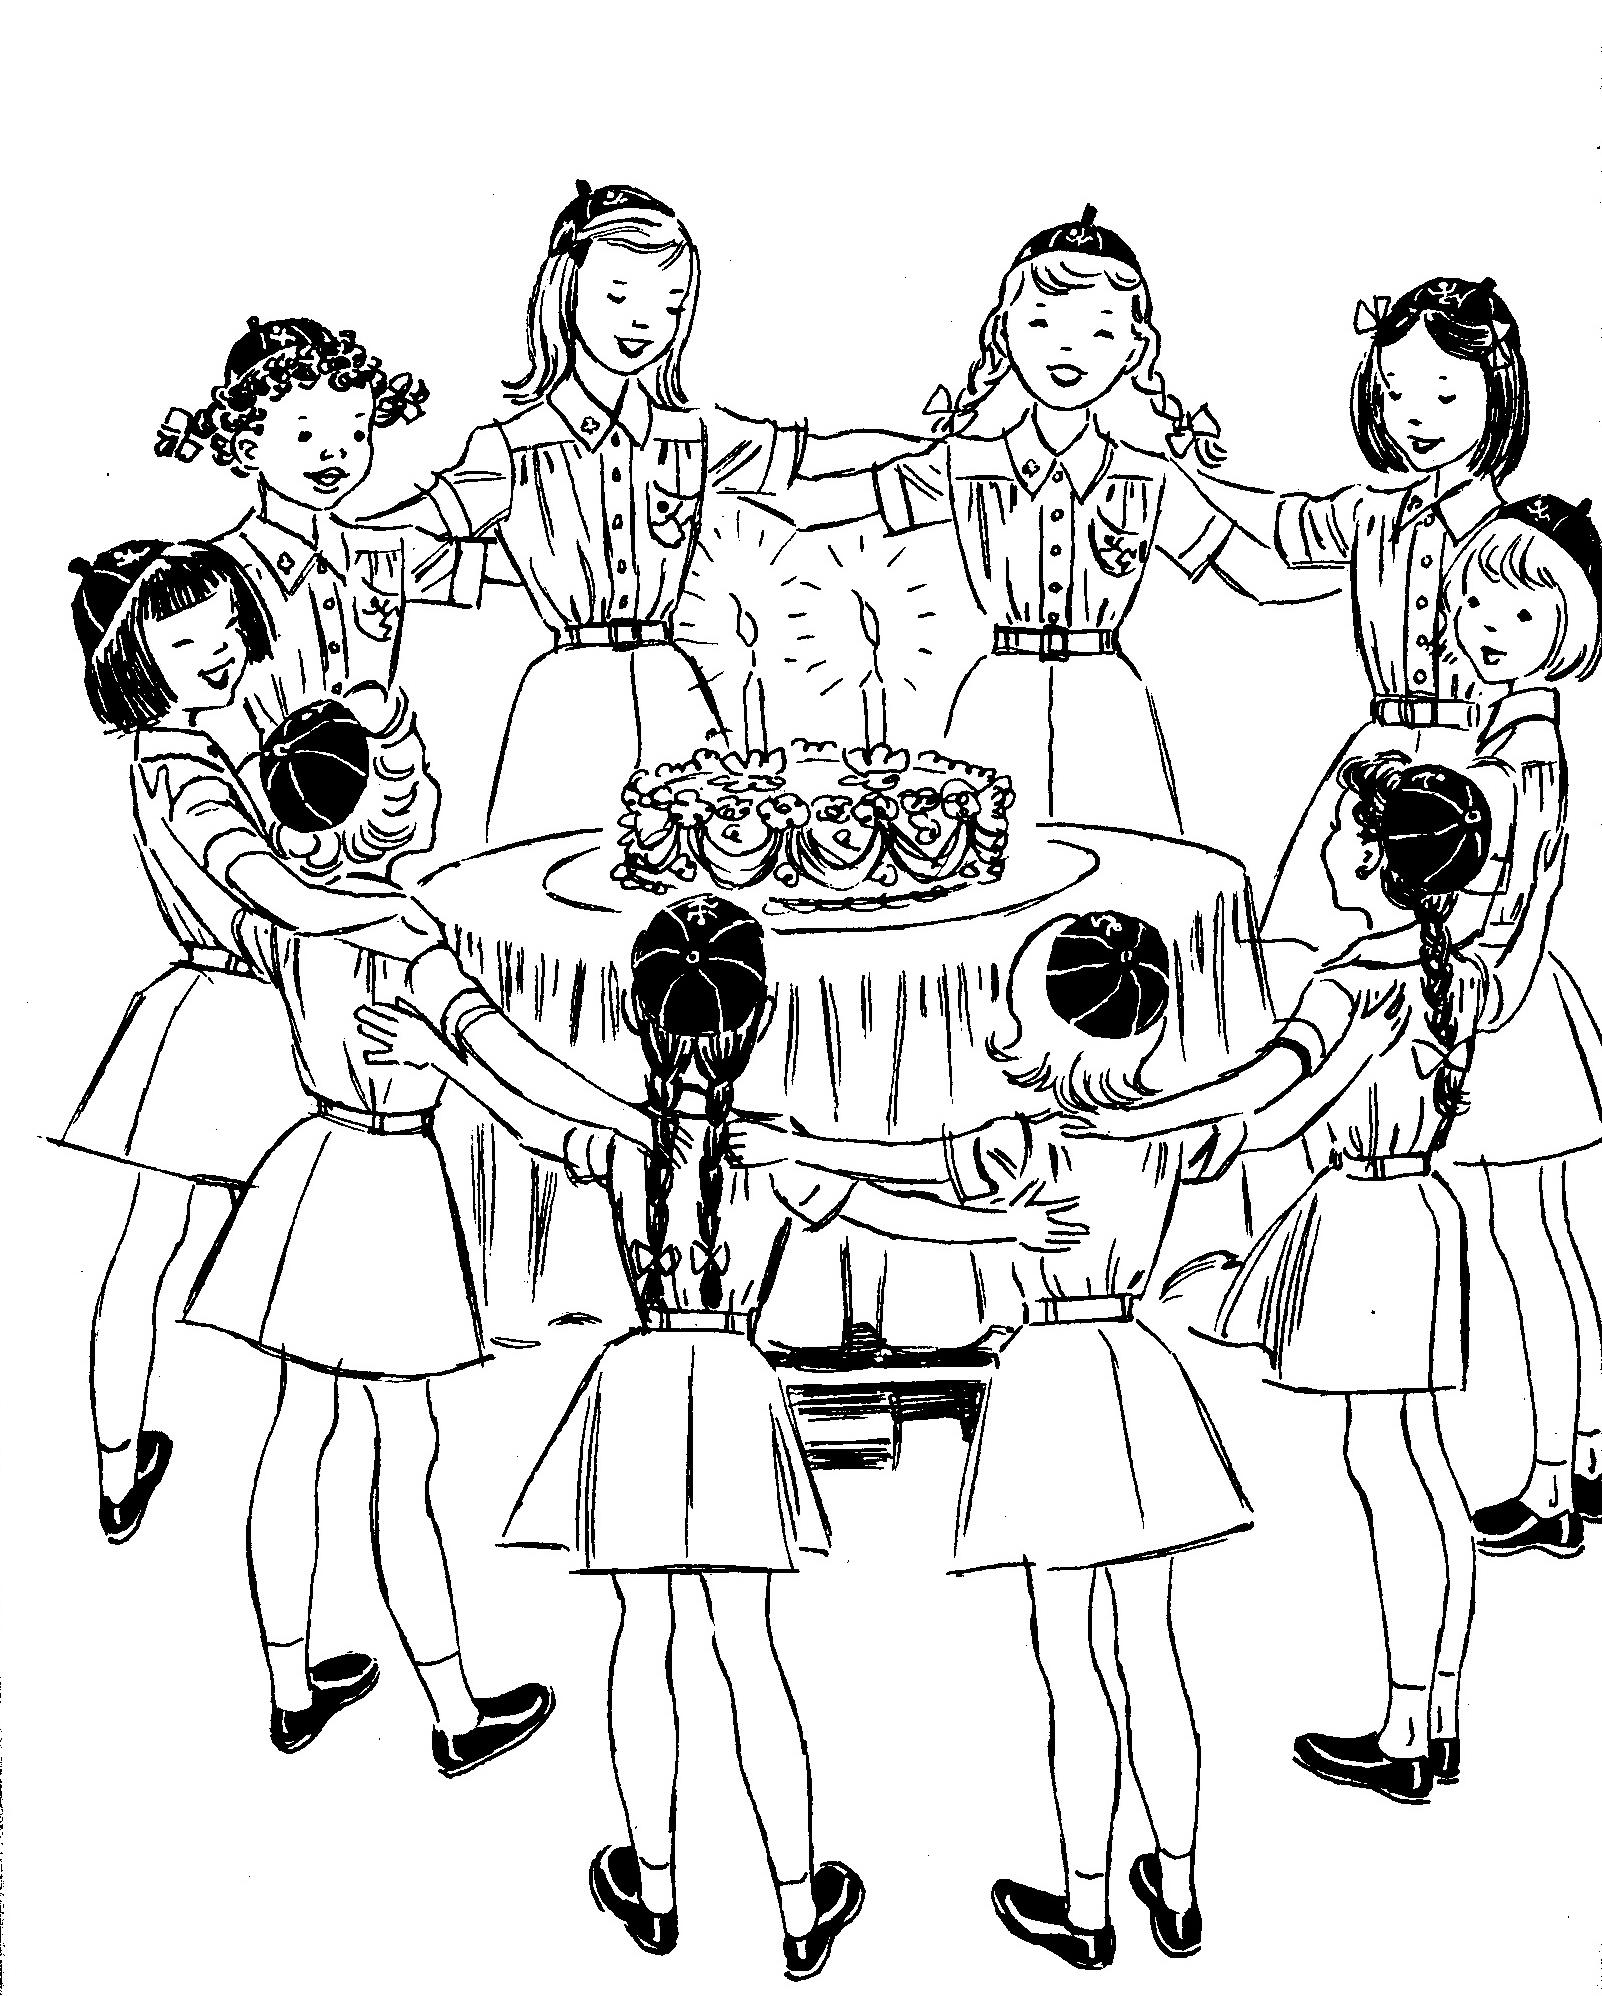 Vintage line drawing at. Brownie clipart old fashioned